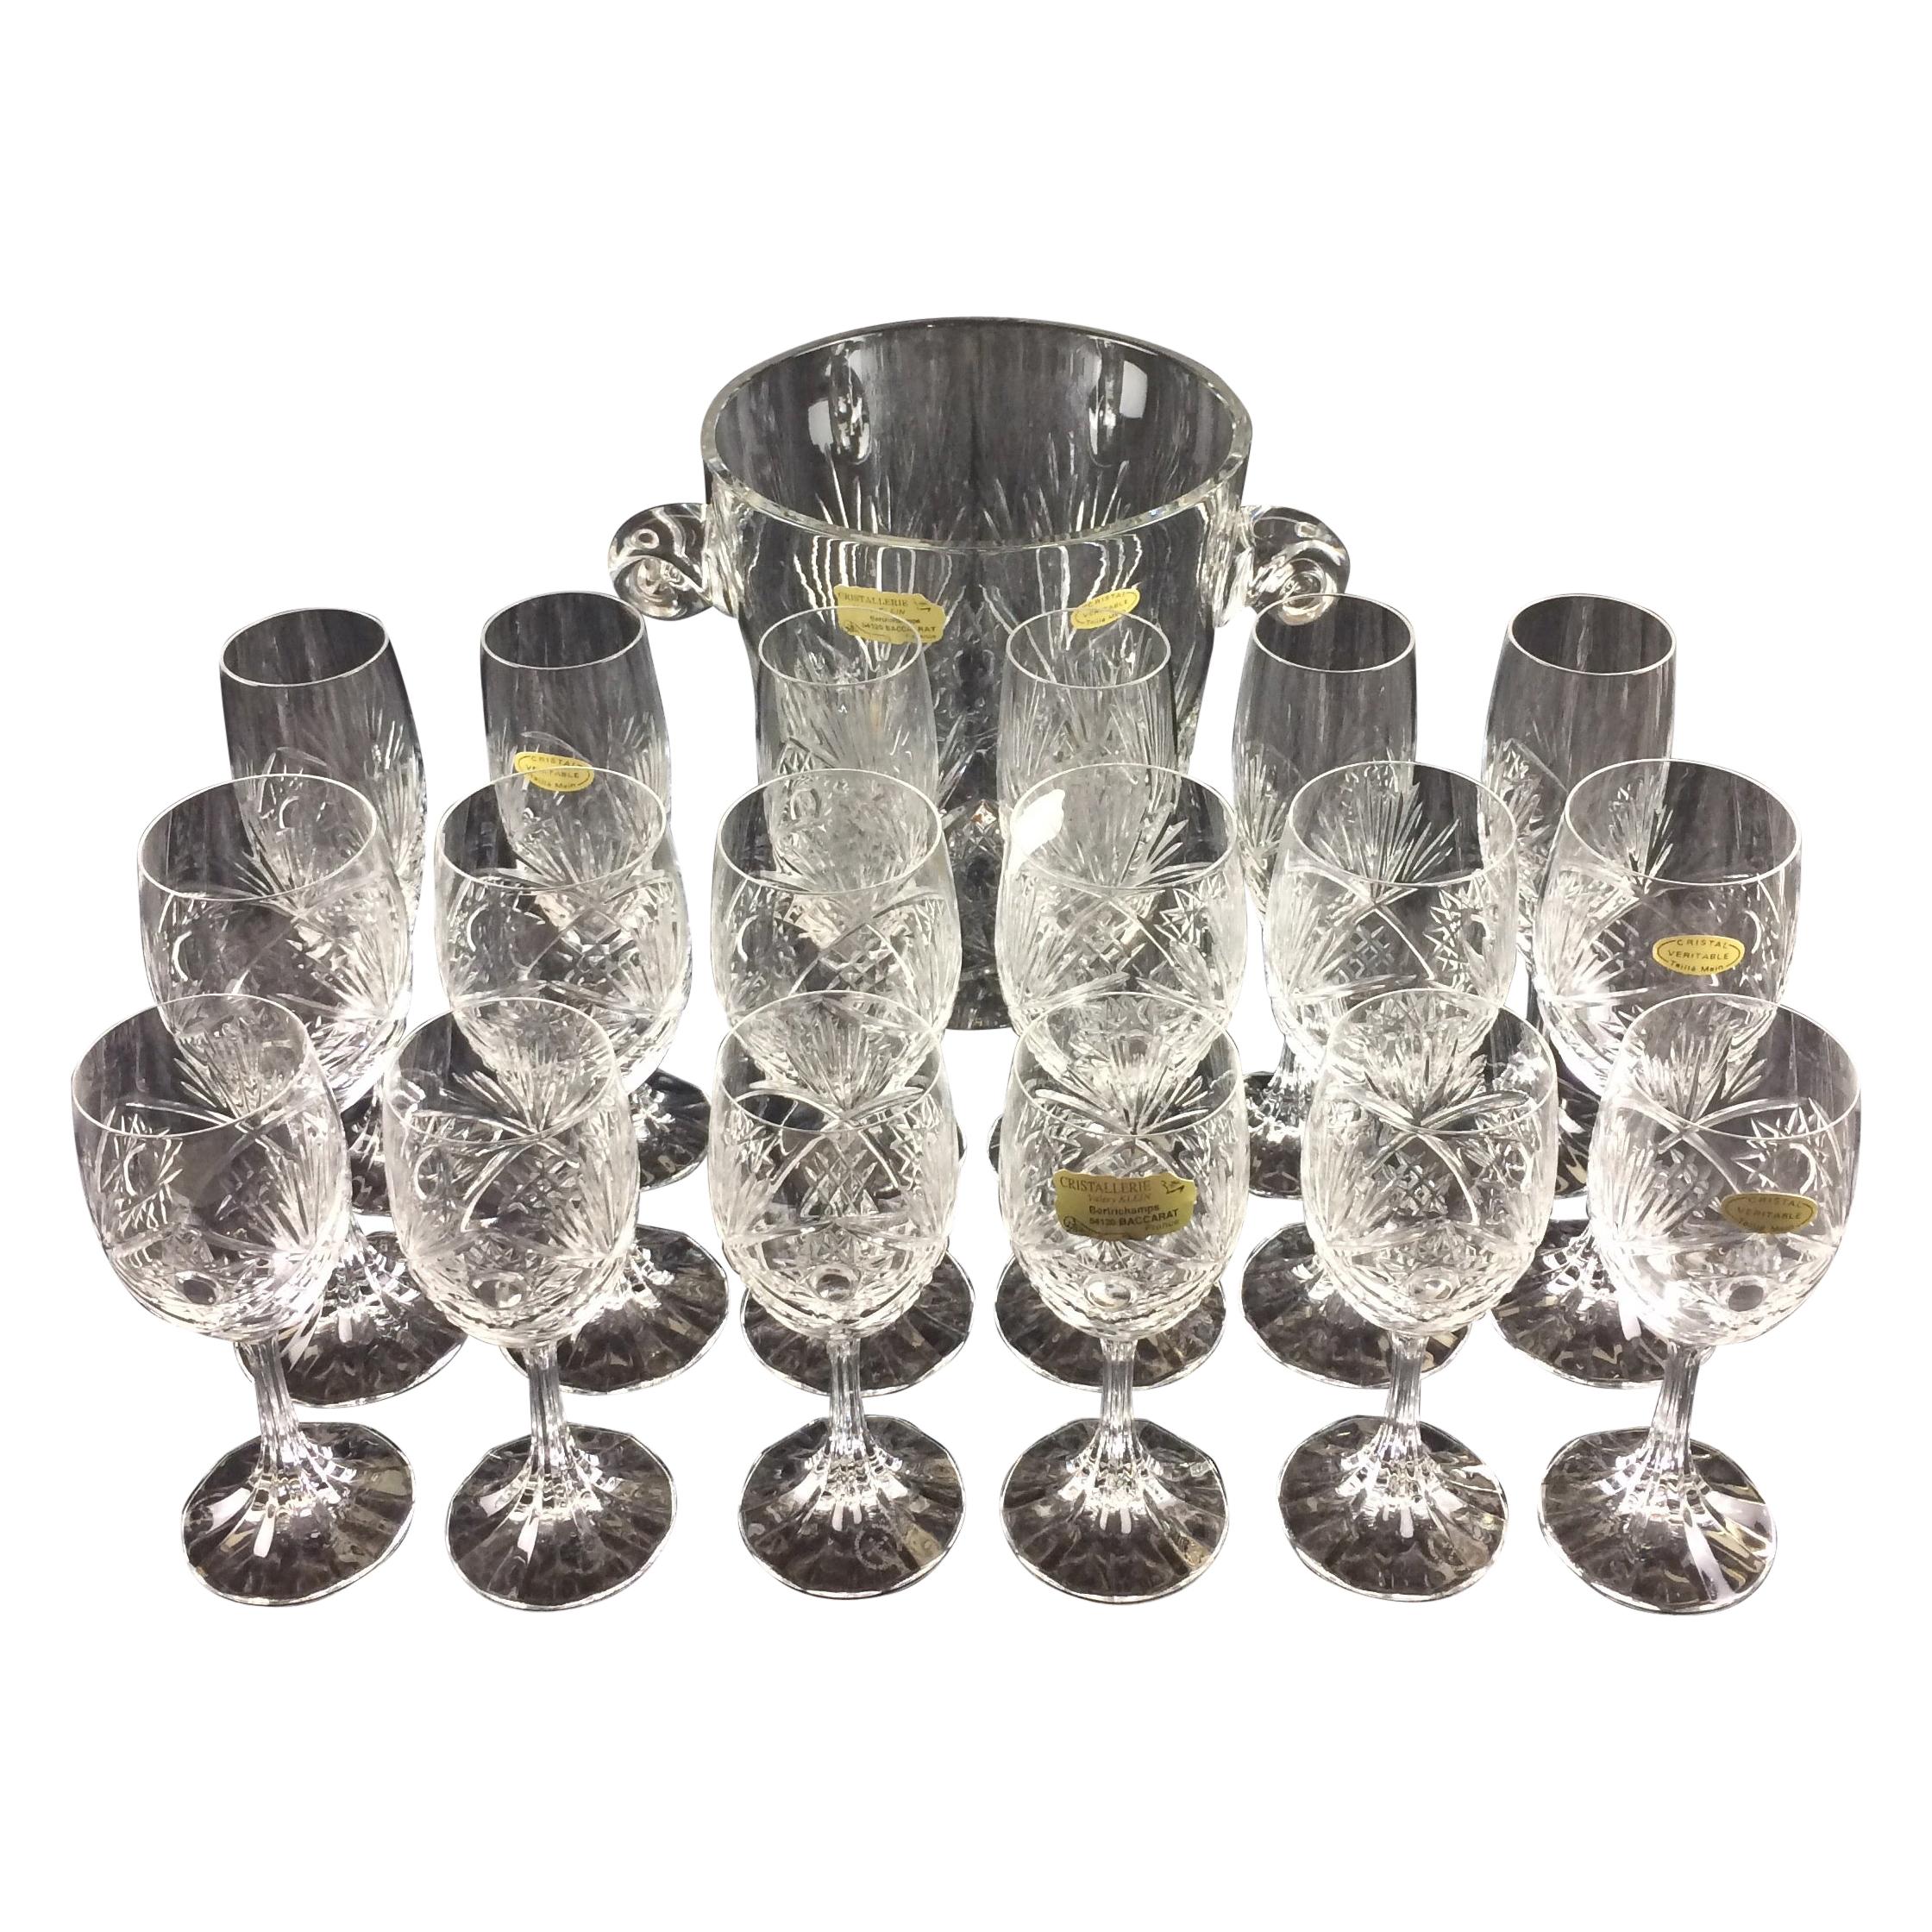 Stunning Set of Baccarat Crystal Wine, Water Glasses, Champagne Flutes & Bucket